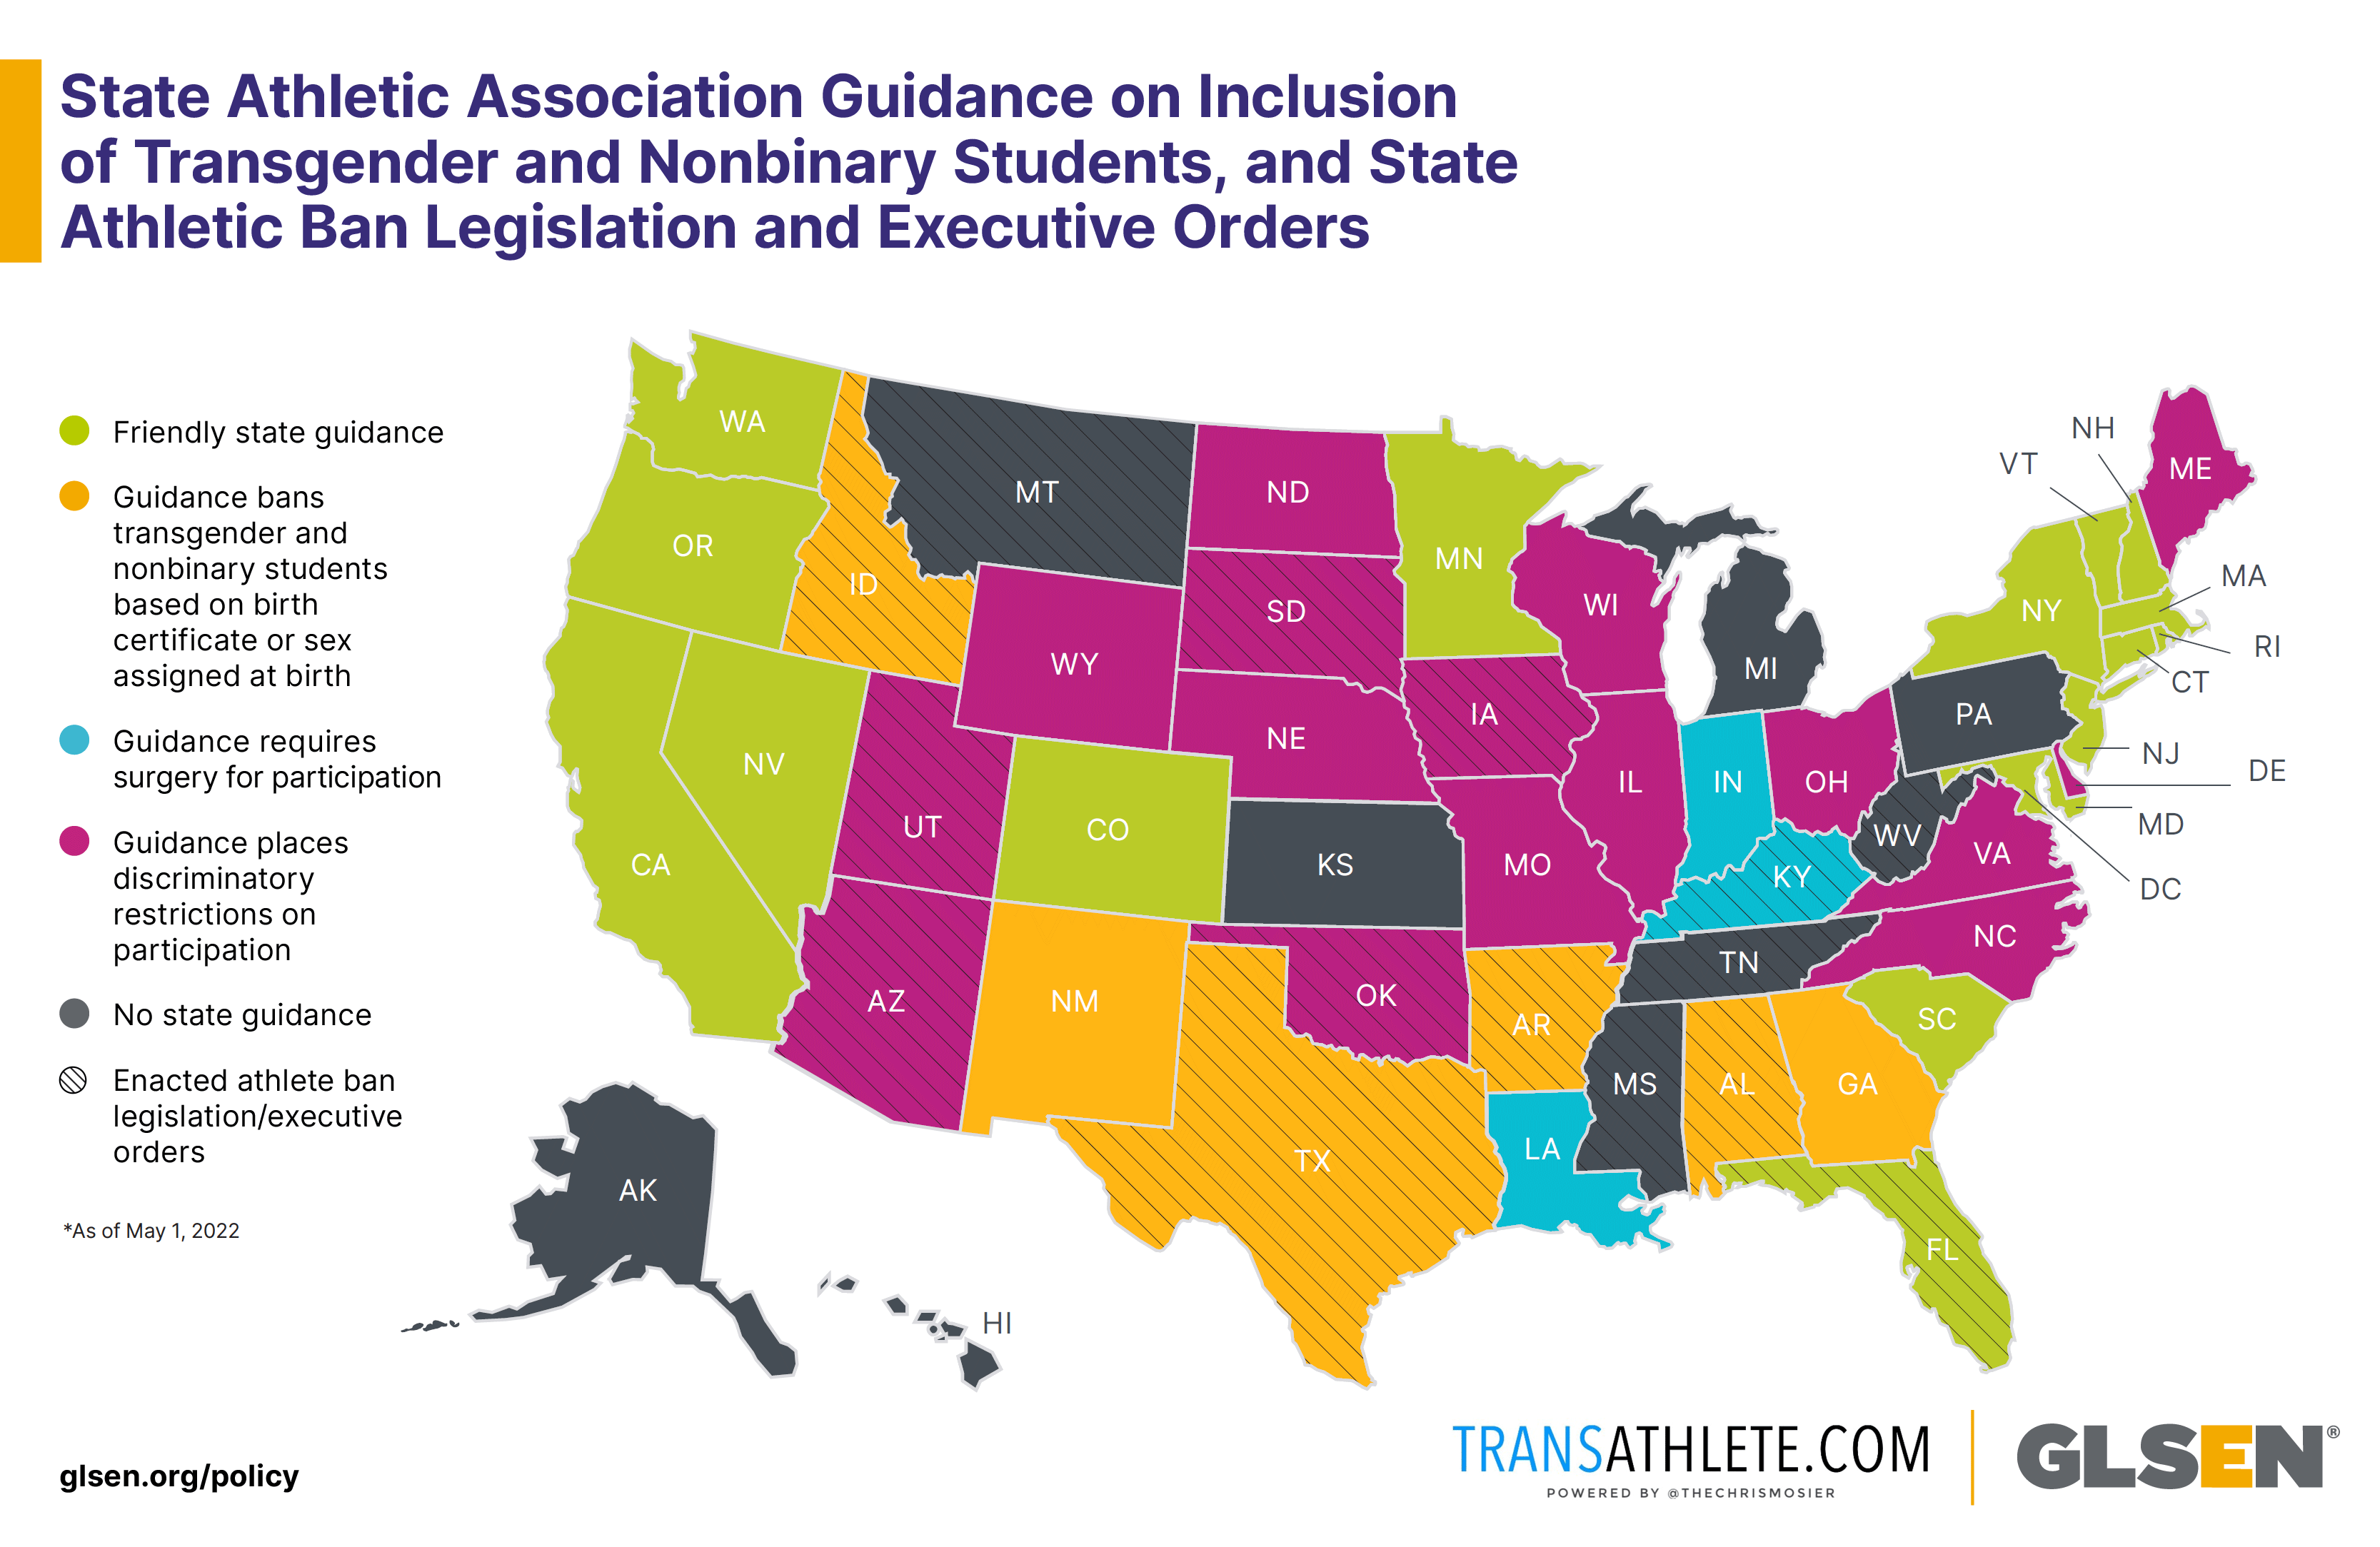 State Athletic Association Guidance on Inclusion of Transgender and Nonbinary Students & State Athletic Ban Legislation or Executive Orders